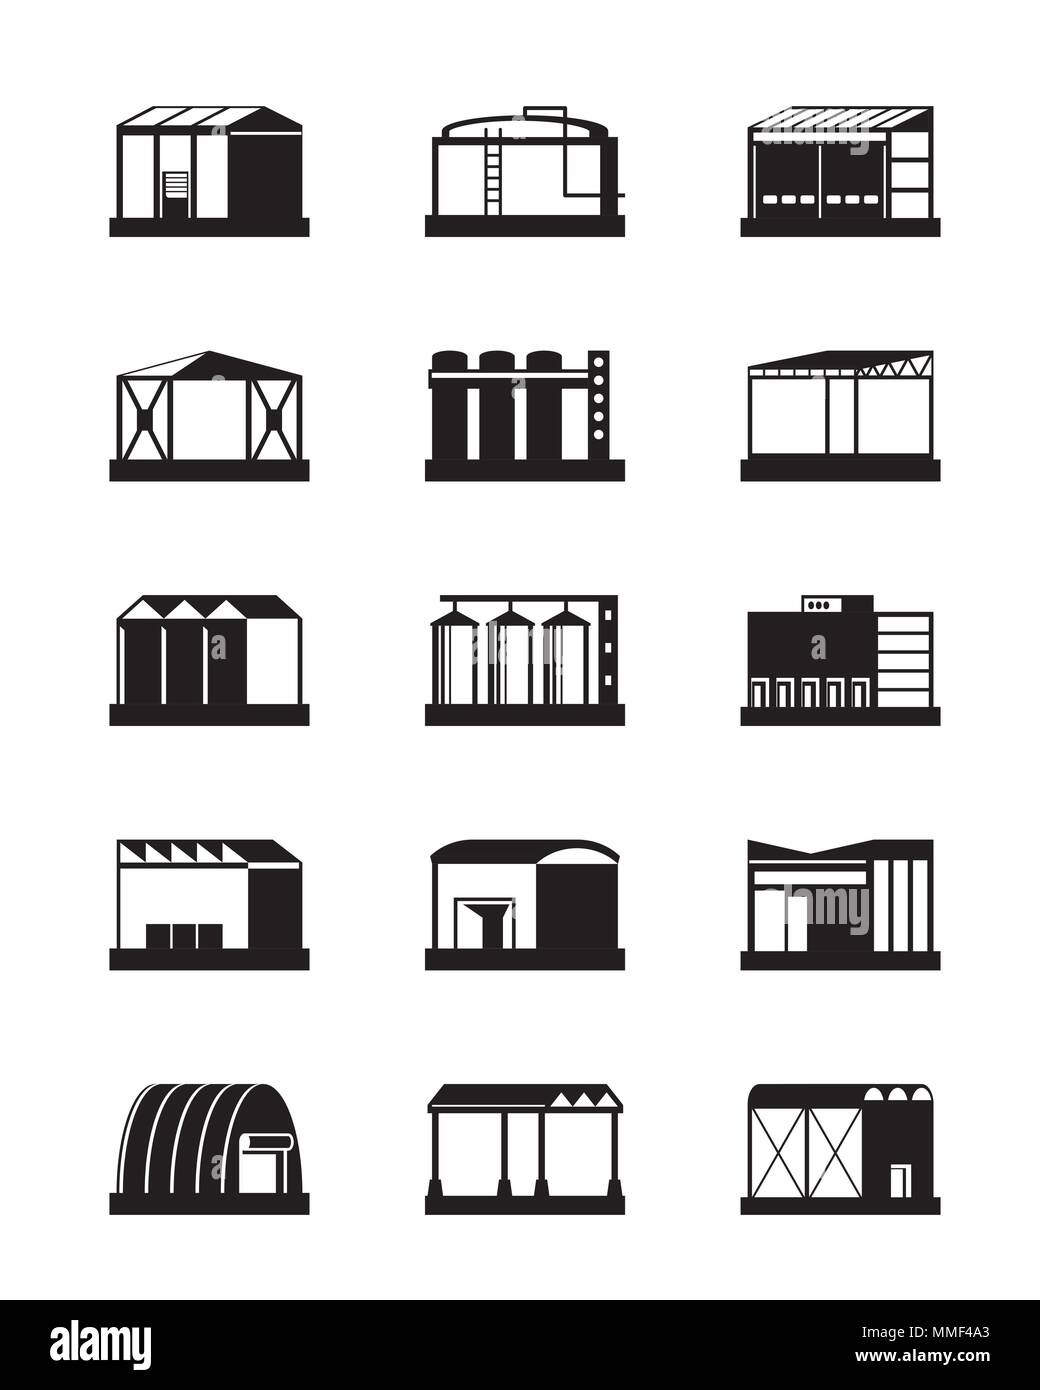 Industrial warehouses icon set - vector illustration Stock Vector